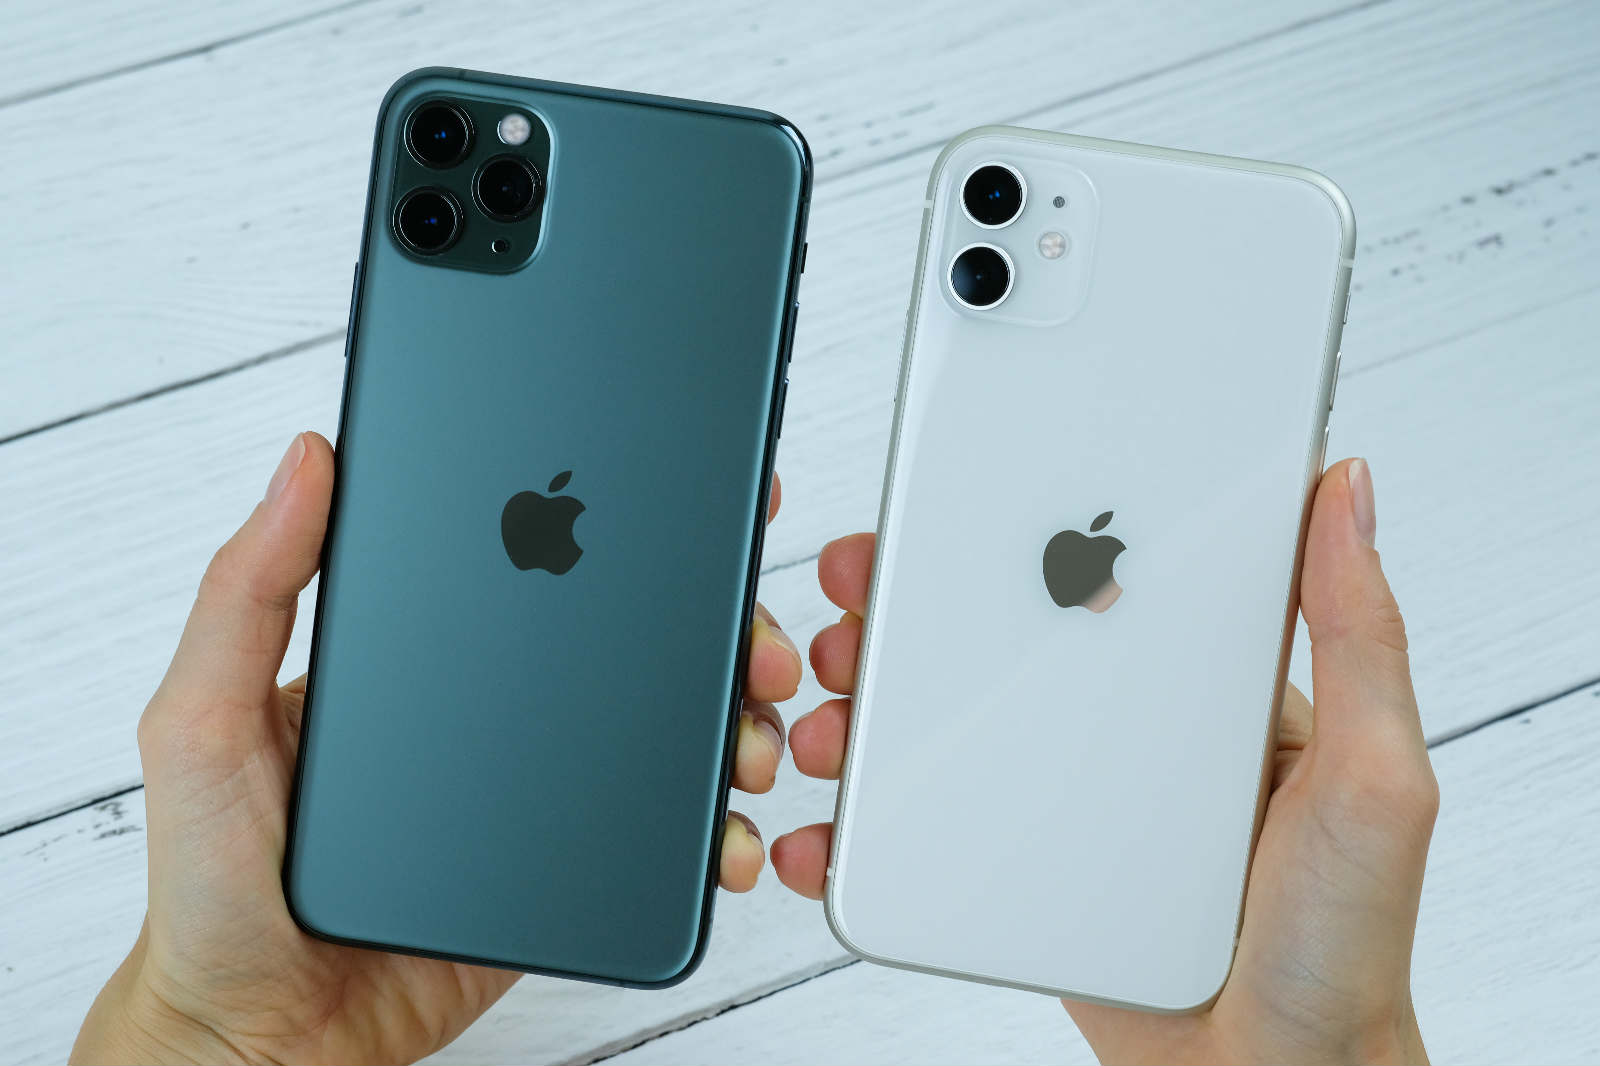 Iphone 11 Vs Iphone 11 Pro Which Should You Buy Esr Blog